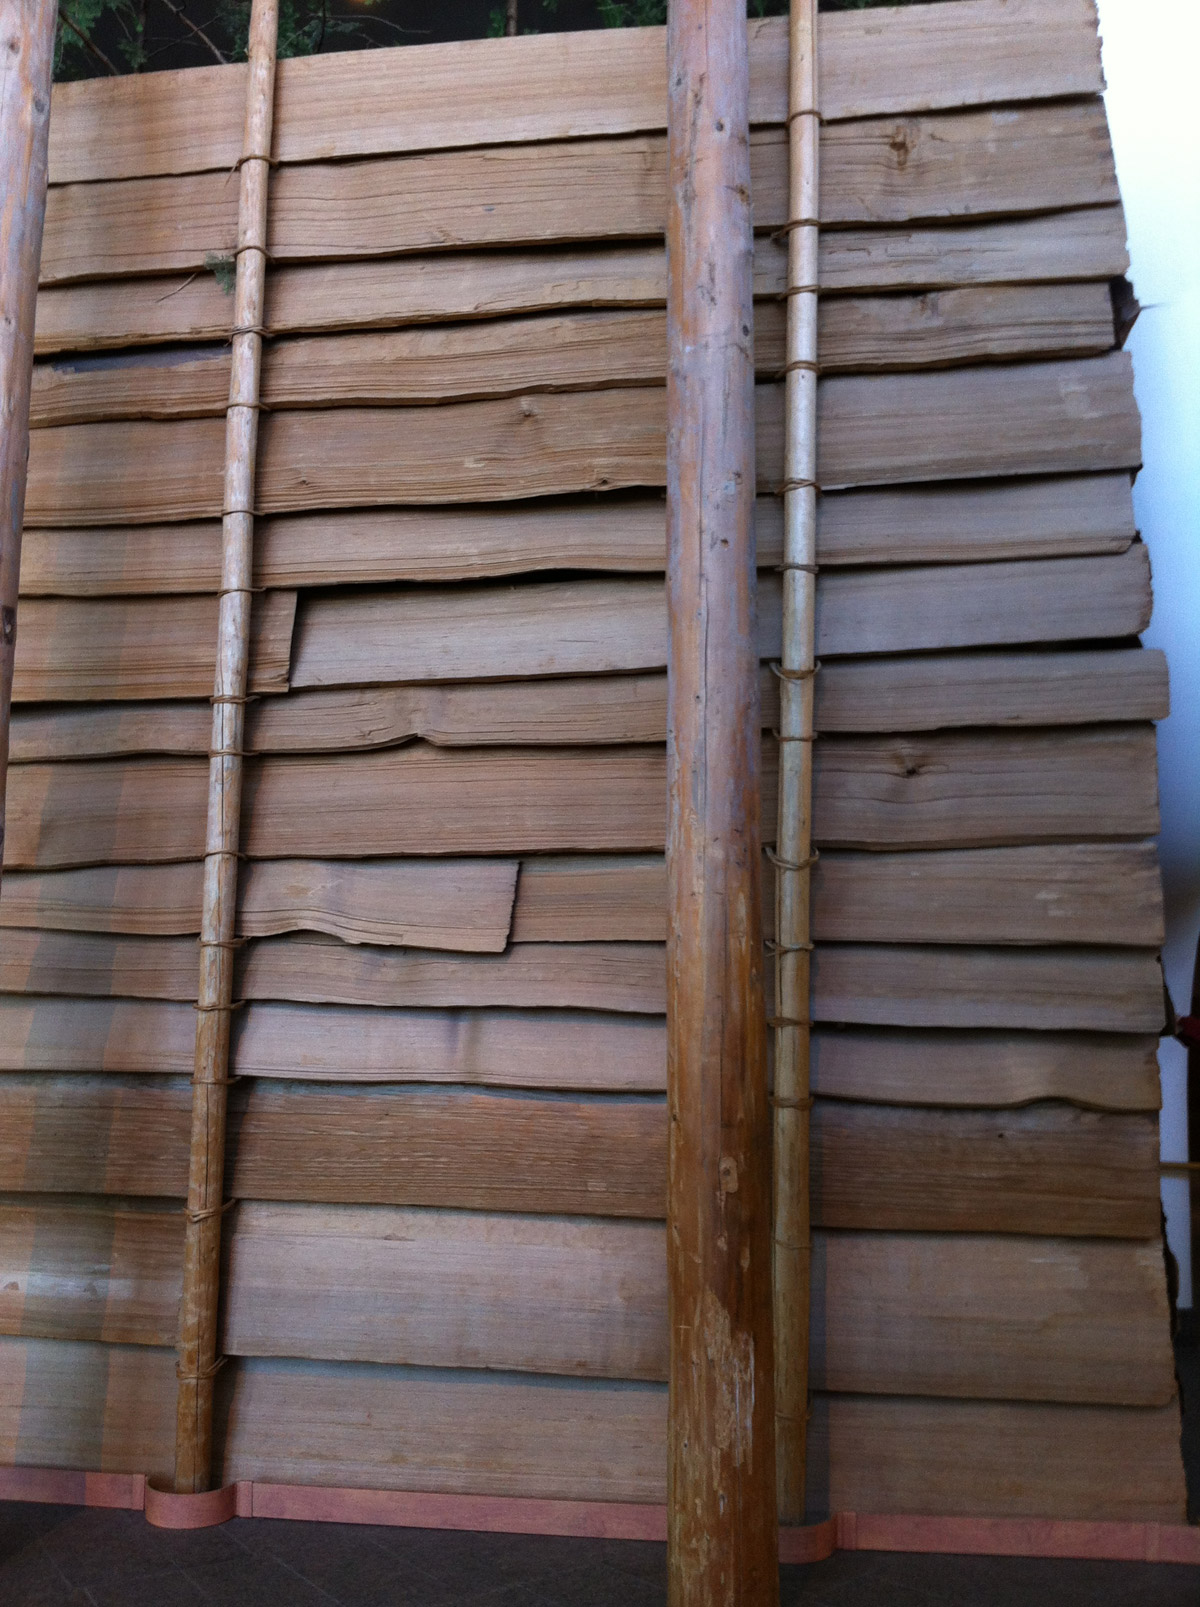 A series of overlapping horizontal wood planks held upright by small posts